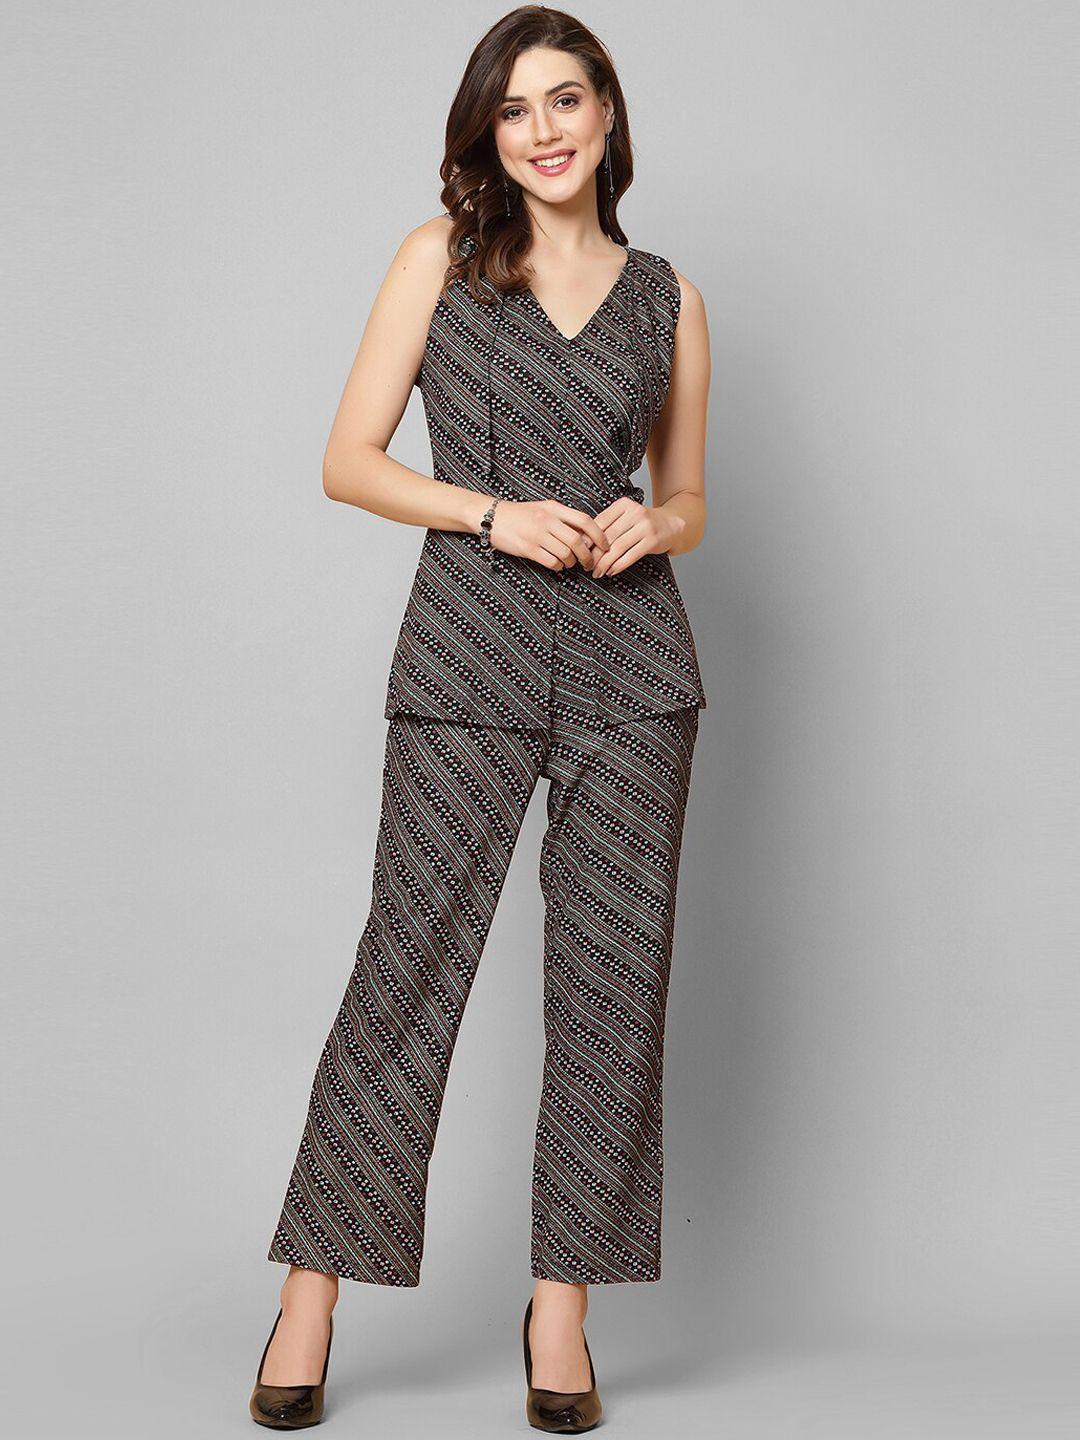 selvia printed v-neck top with printed trouser